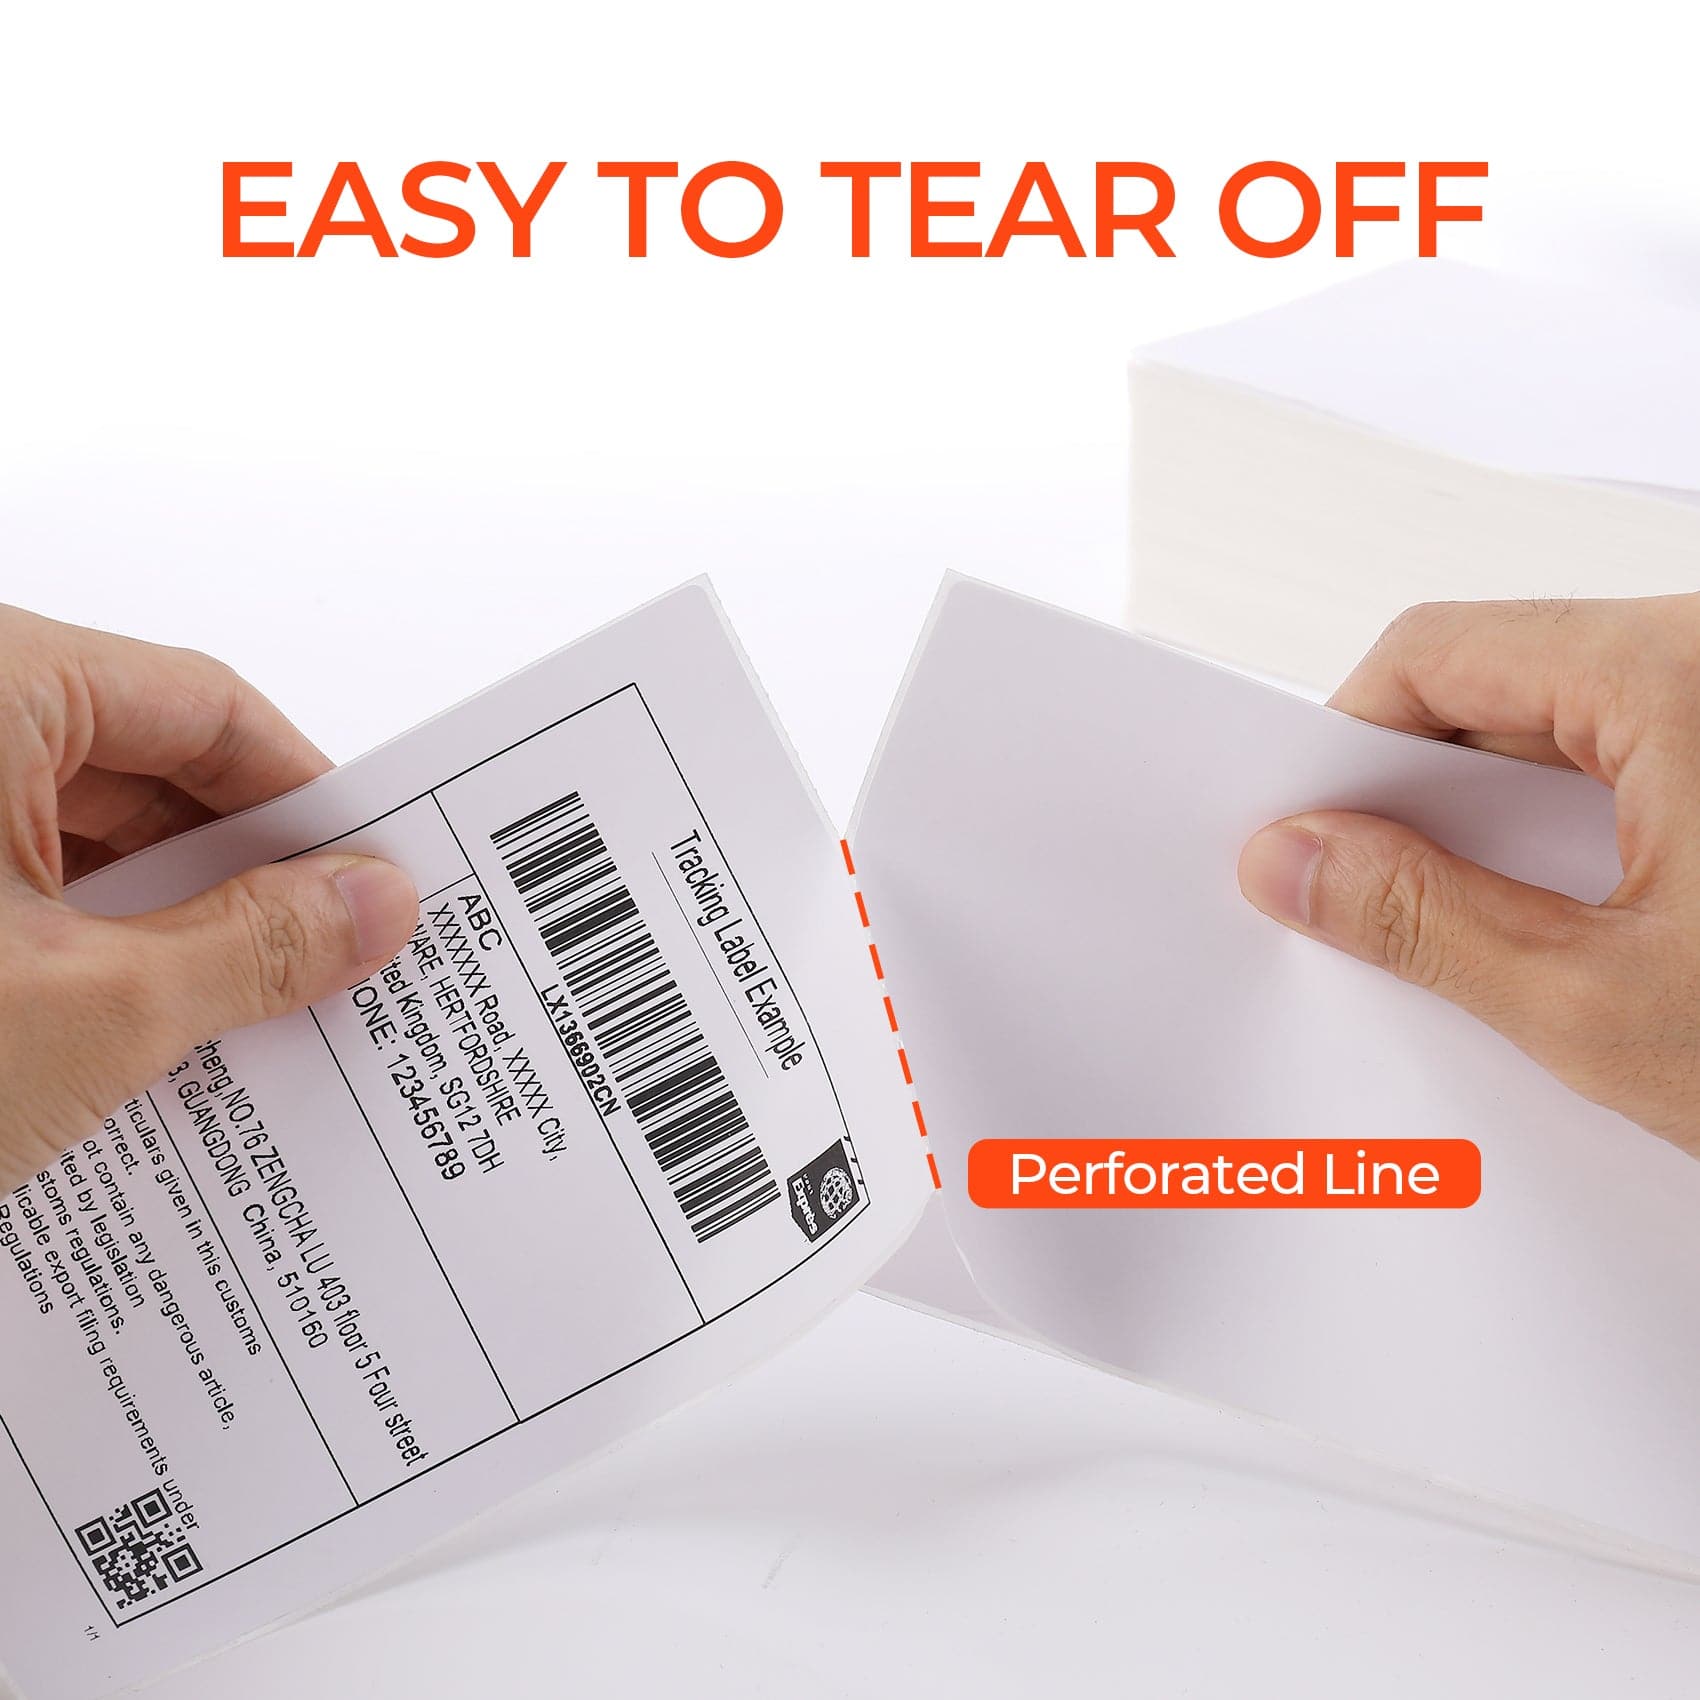 MUNBYN 4x6 thermal labels have perforated line and are easy to tear off.